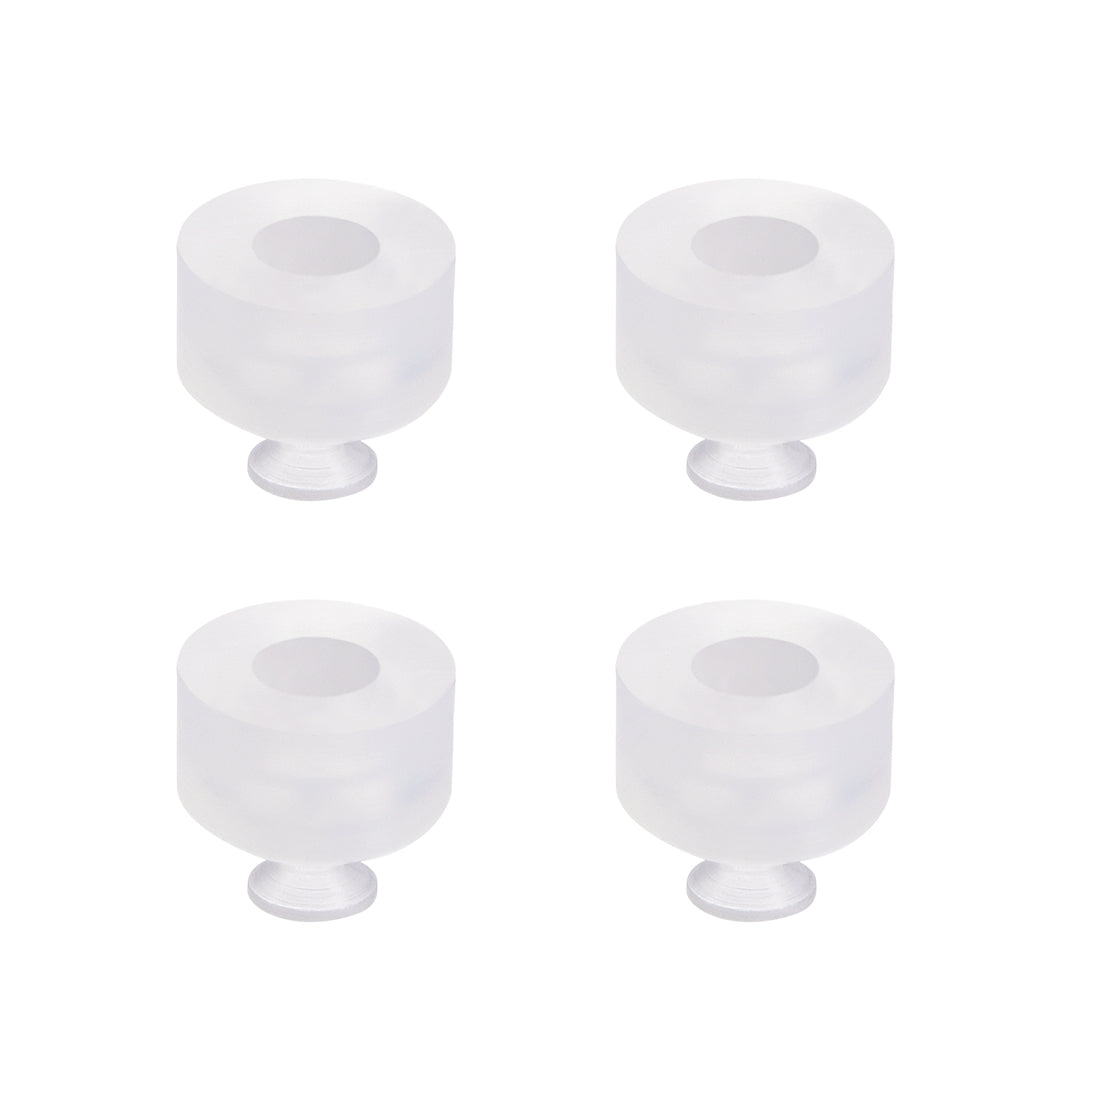 uxcell Uxcell Clear White Soft Silicone Waterproof  Miniature Vacuum Suction Cup 5mmx5mm Bellows Suction Cup,4pcs